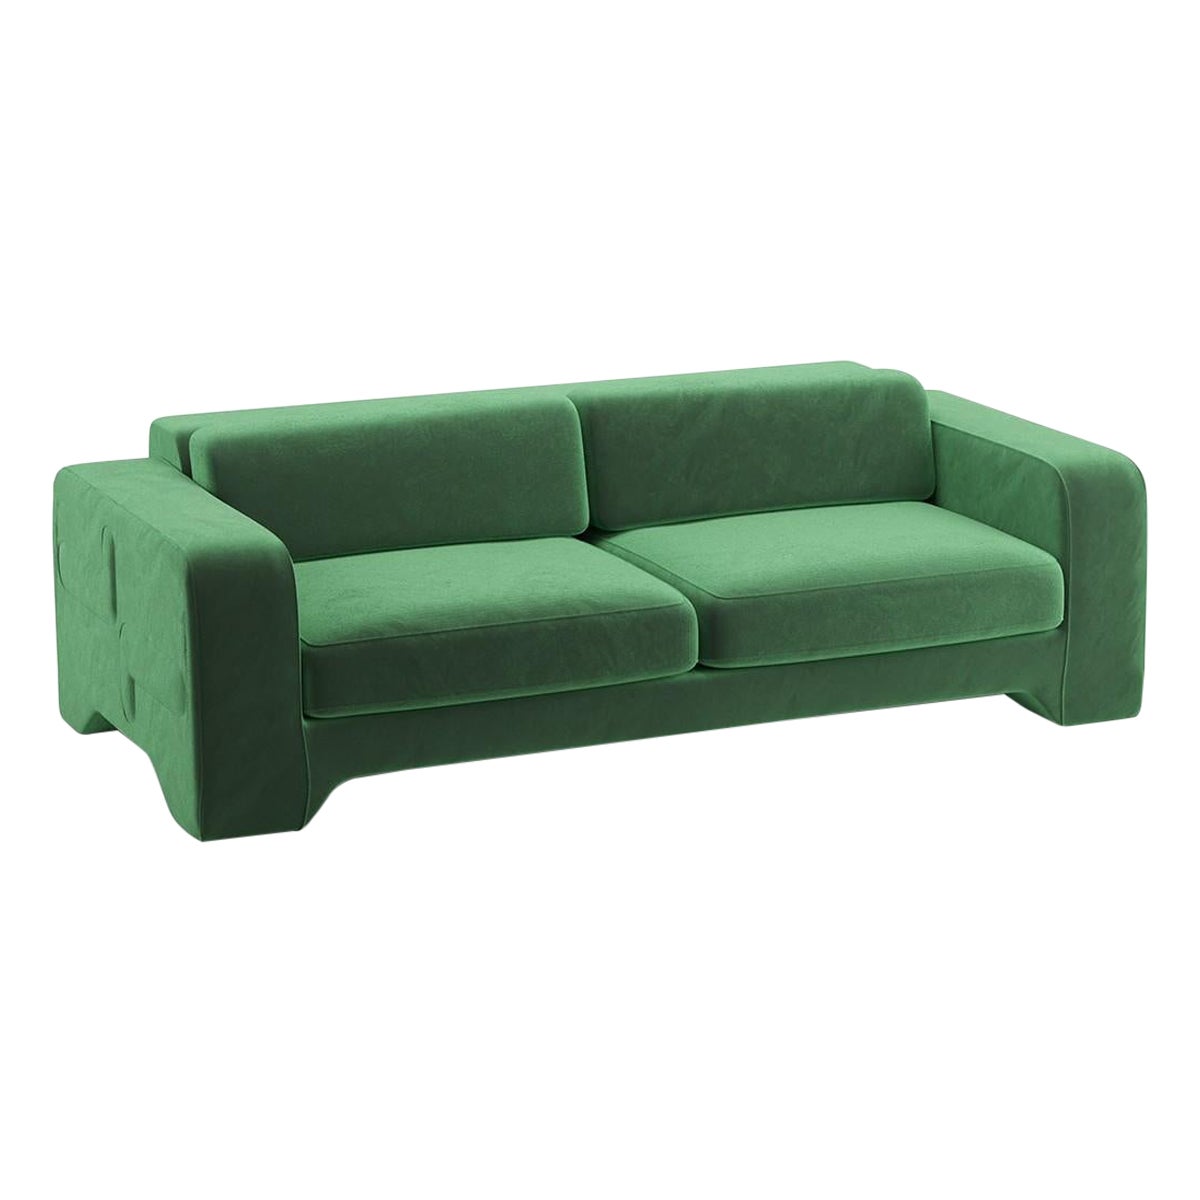 Popus Editions Giovanna 2.5 Seater Sofa in Green '771727' Como Velvet Upholstery For Sale